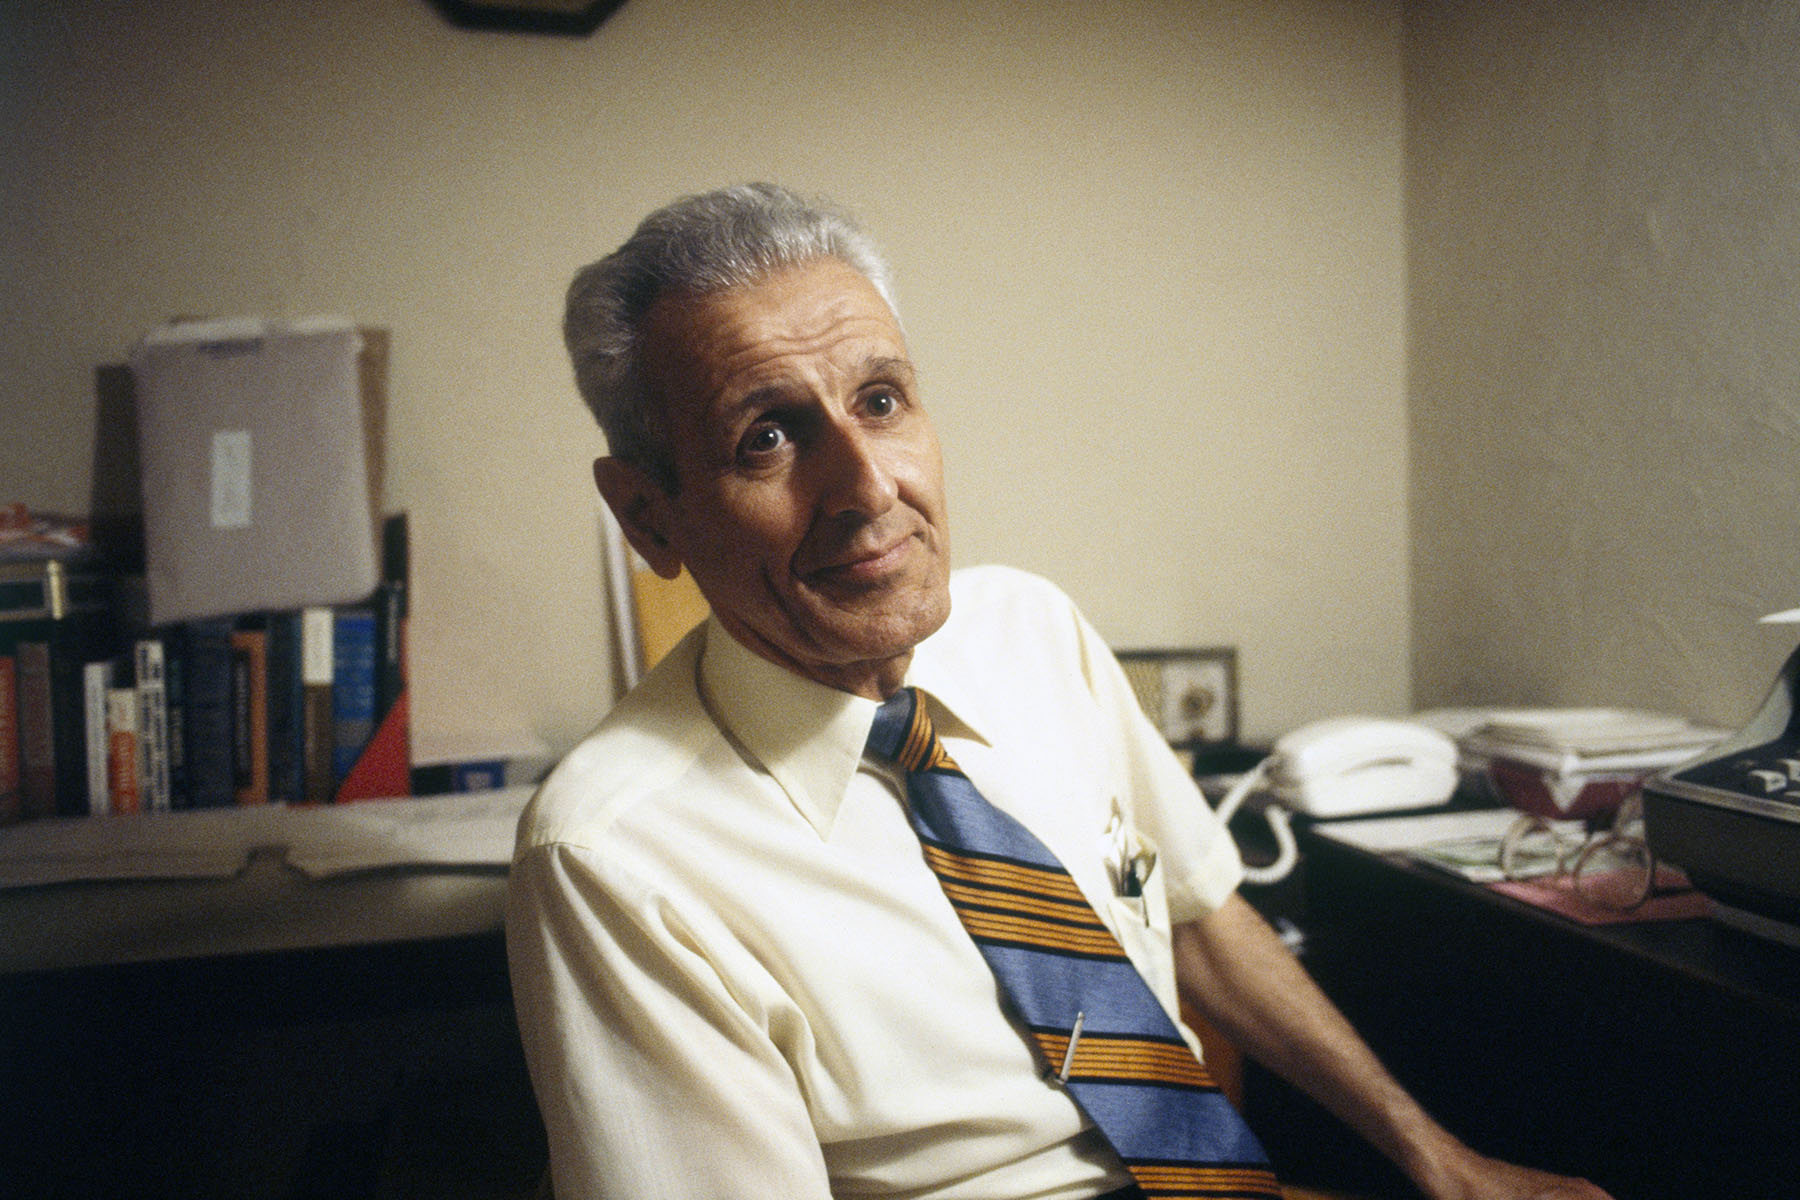 Jack Kevorkian, a Michigan doctor who assisted in the suicides of over a hundred people, poses for a portrait in 1990.